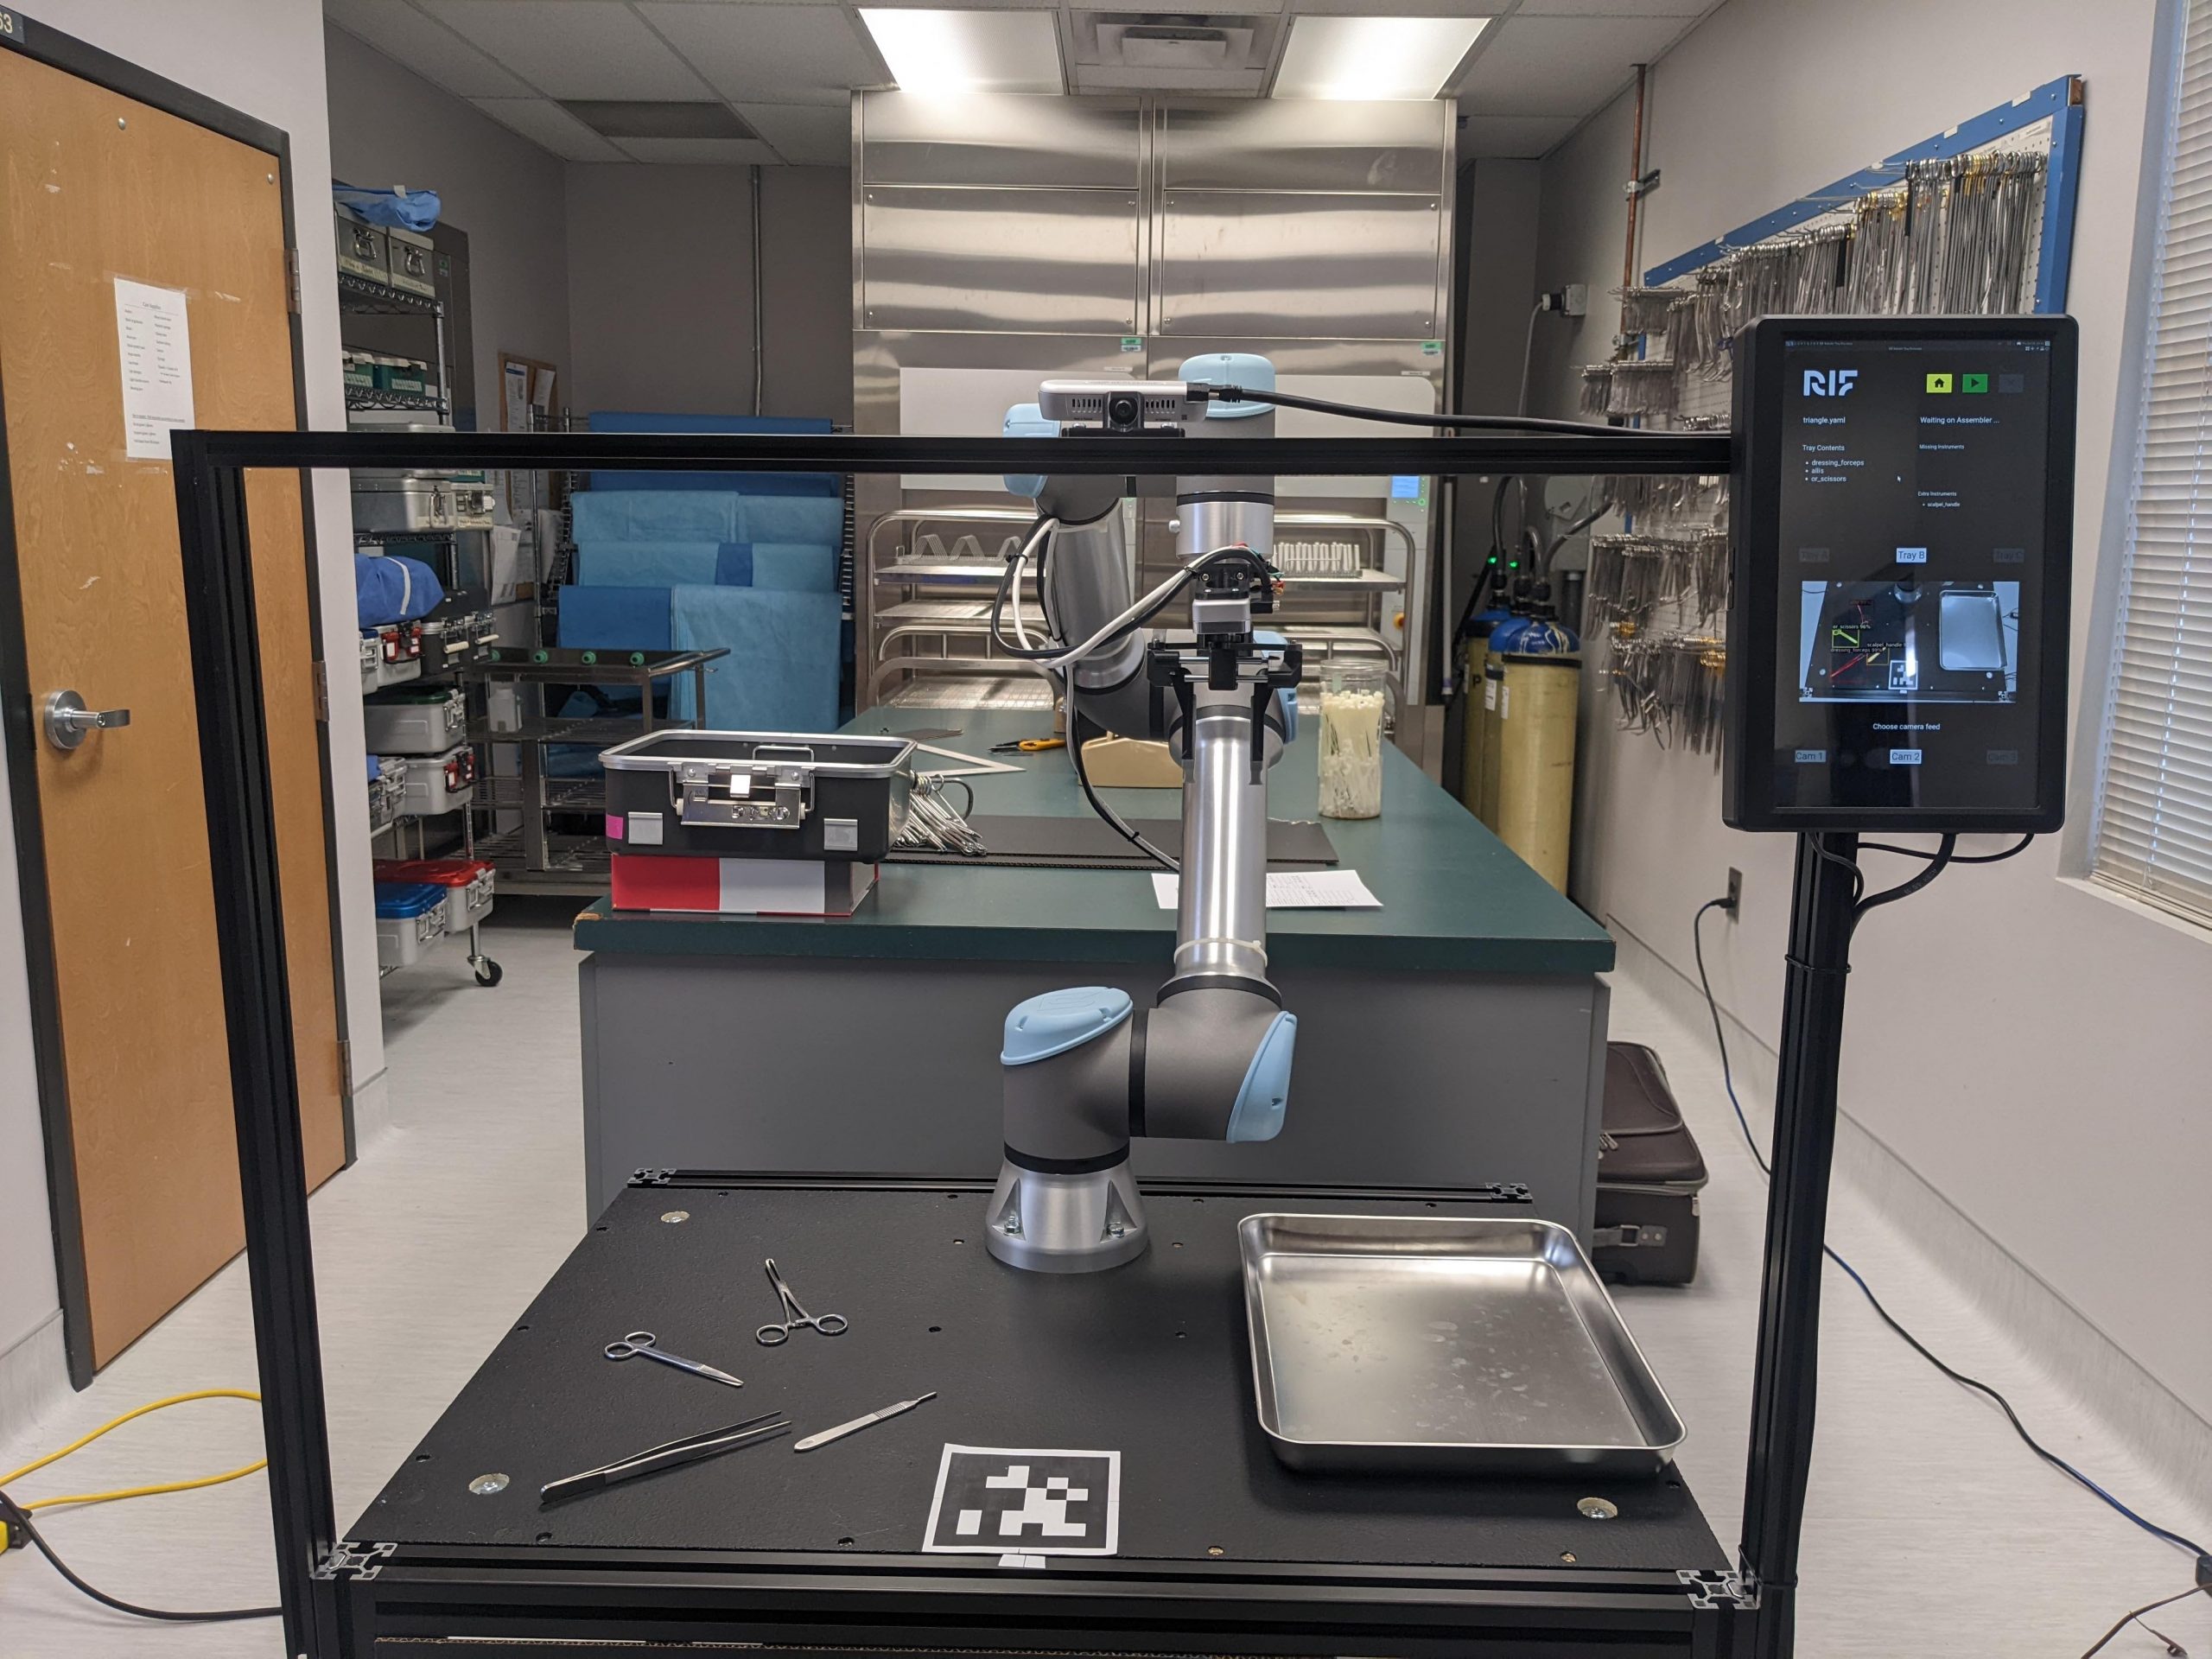 RIF Robotics powers robots that inspect and organize surgical equipment